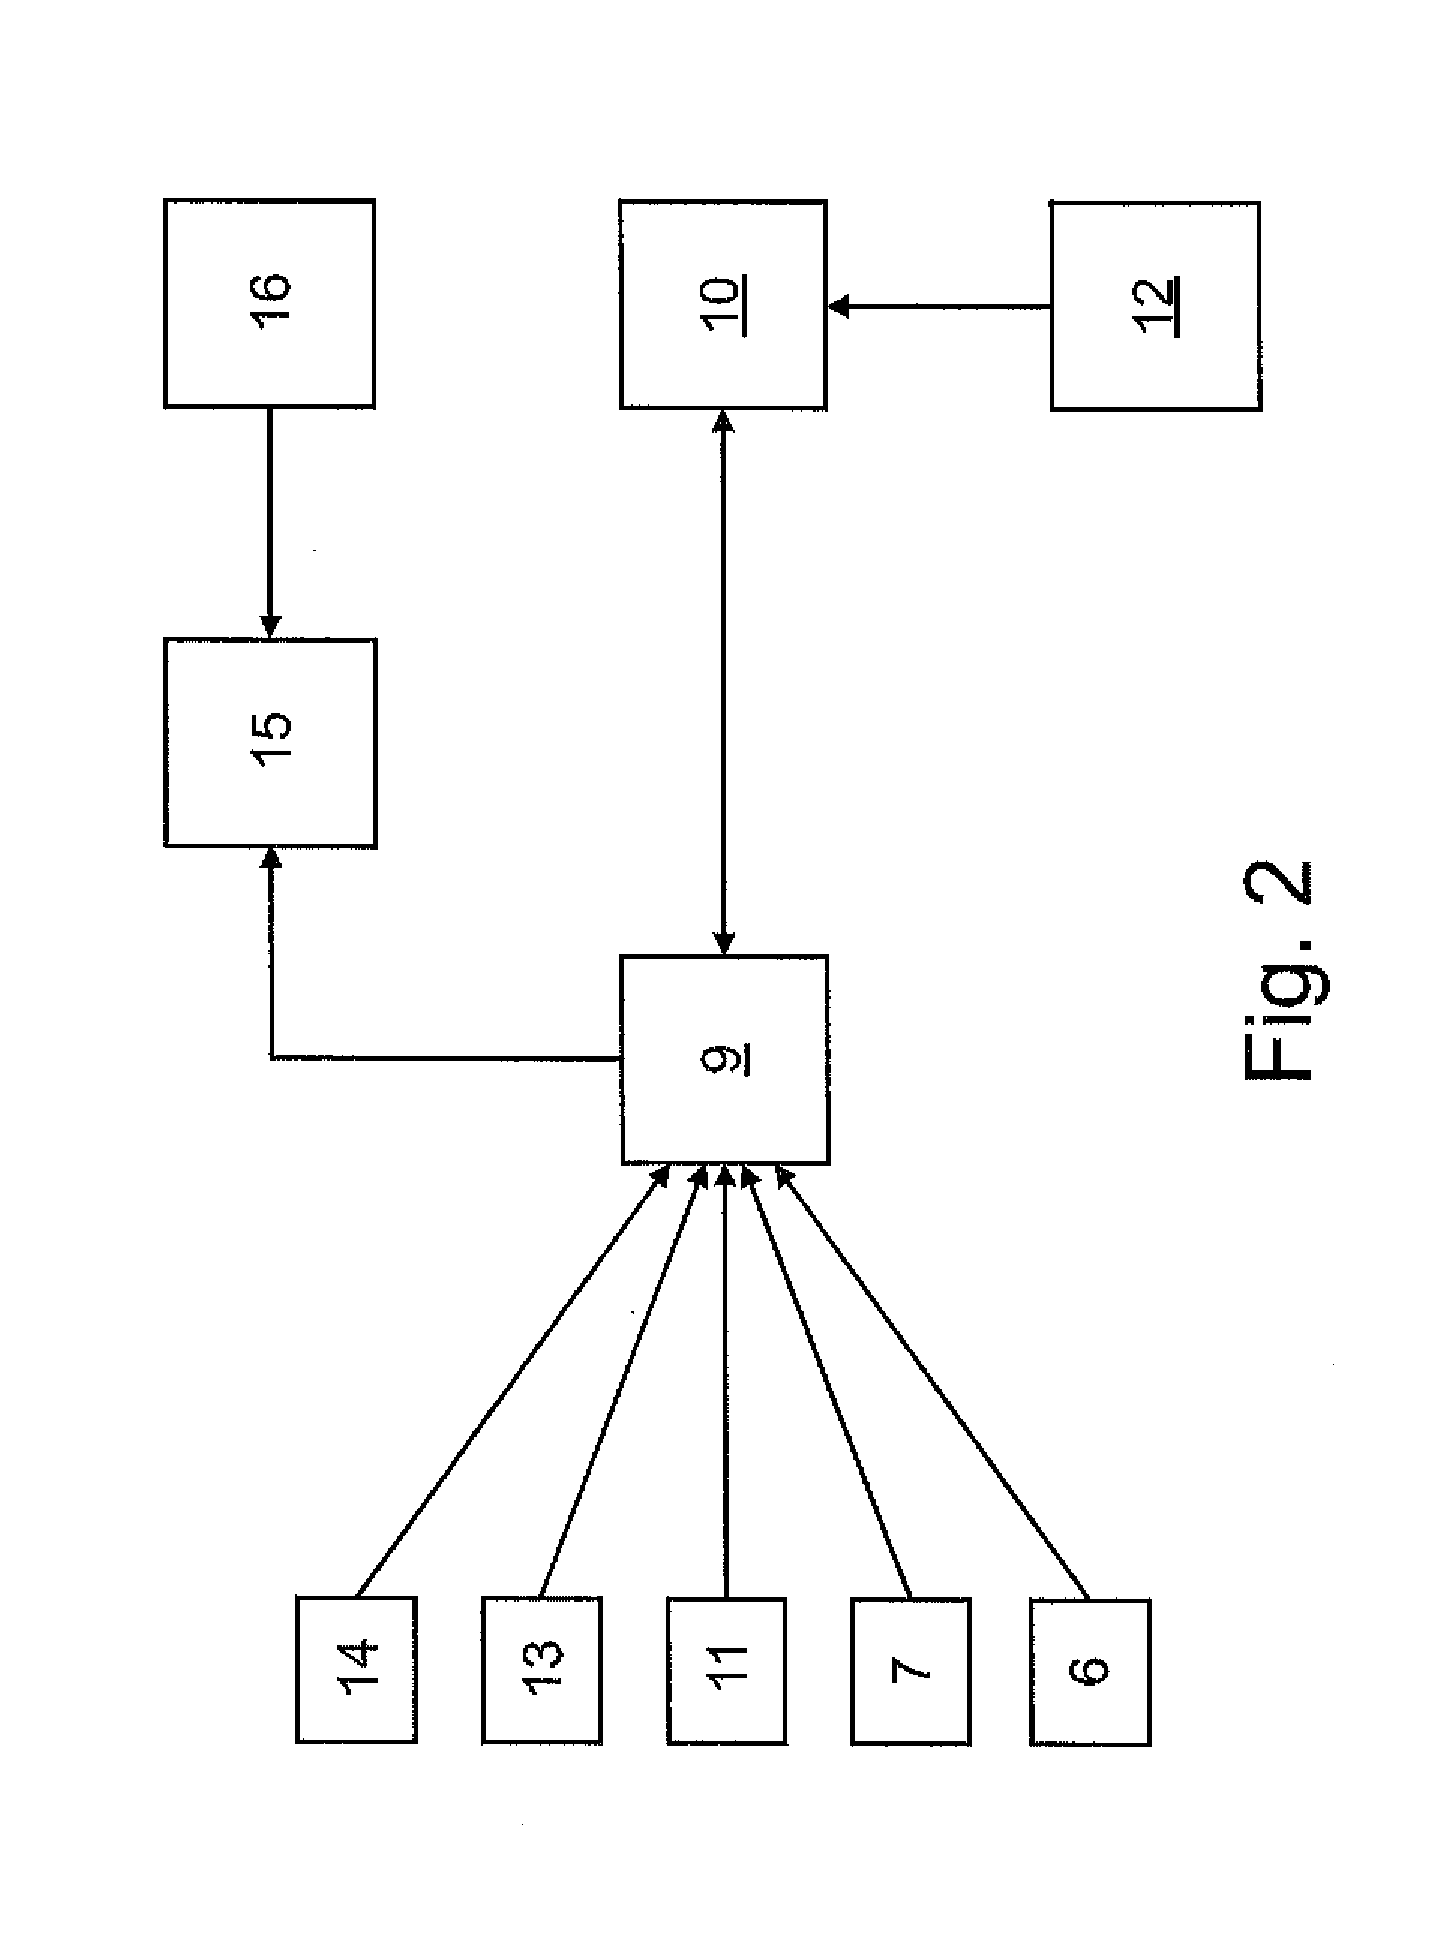 Method for the computer-supported control of a ship